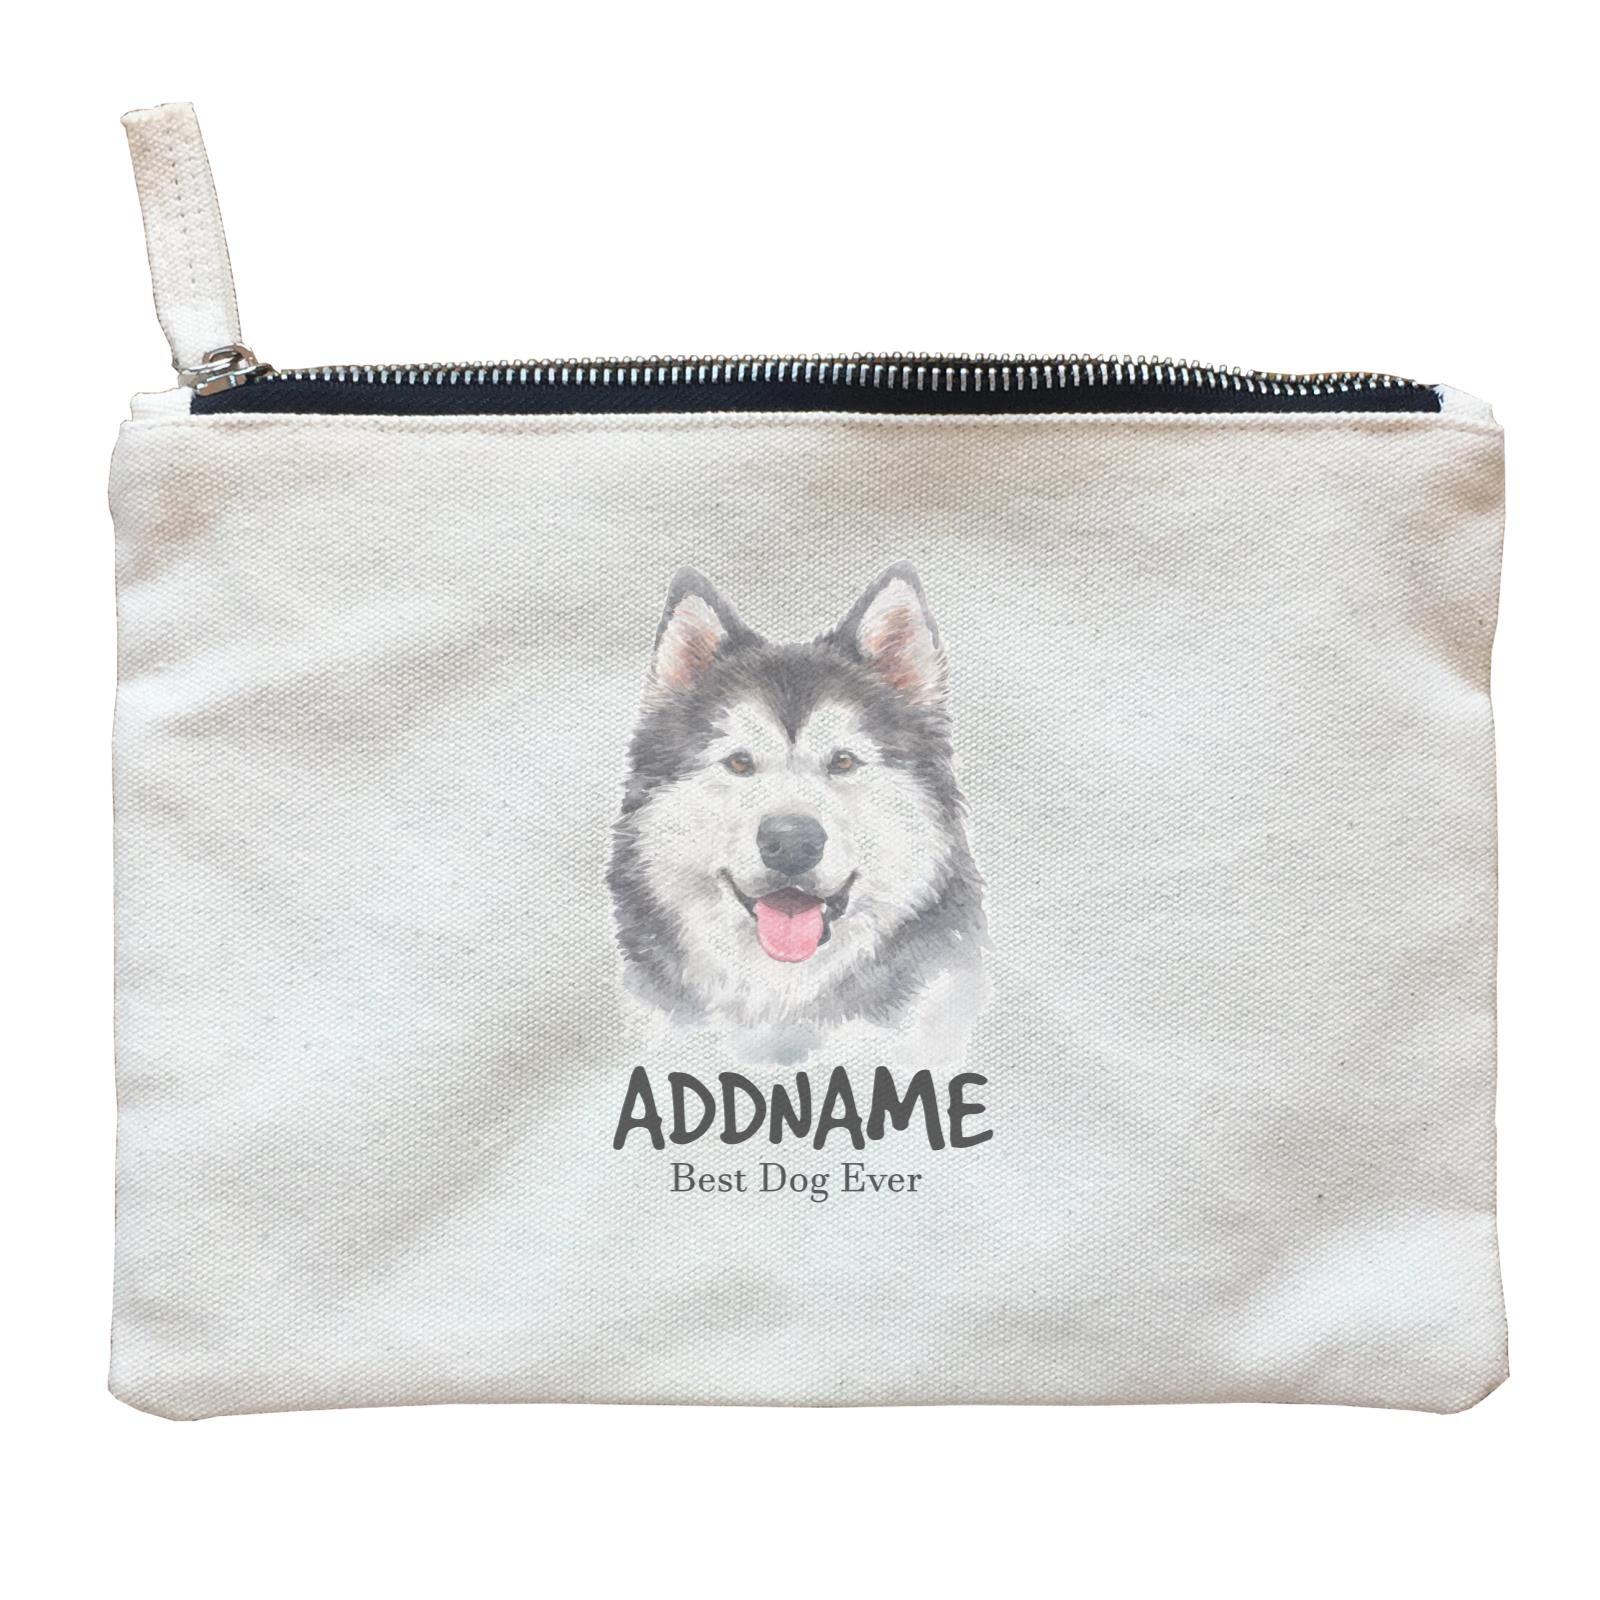 Watercolor Dog Siberian Husky Smile Best Dog Ever Addname Zipper Pouch